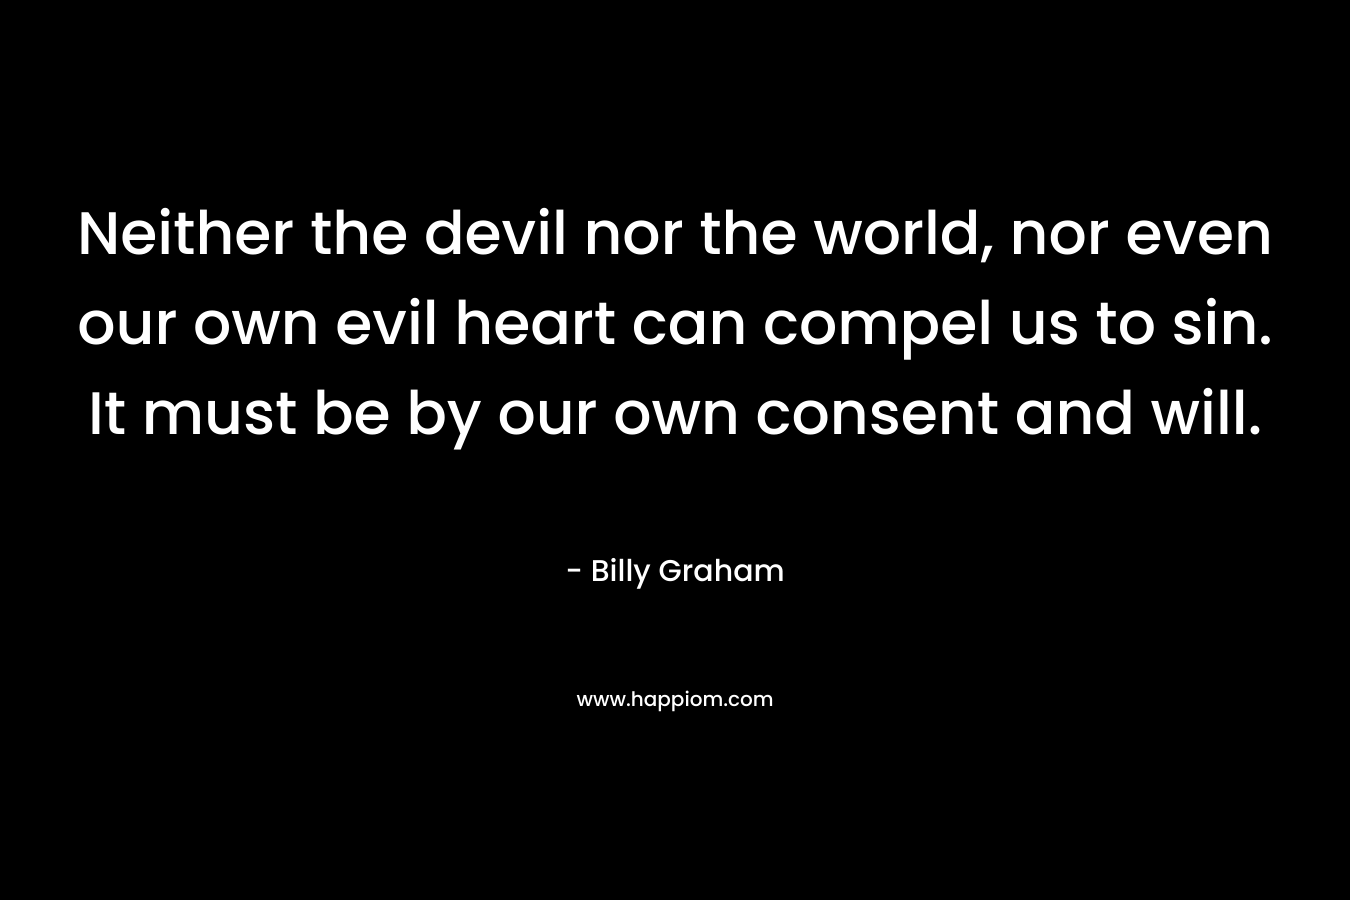 Neither the devil nor the world, nor even our own evil heart can compel us to sin. It must be by our own consent and will.